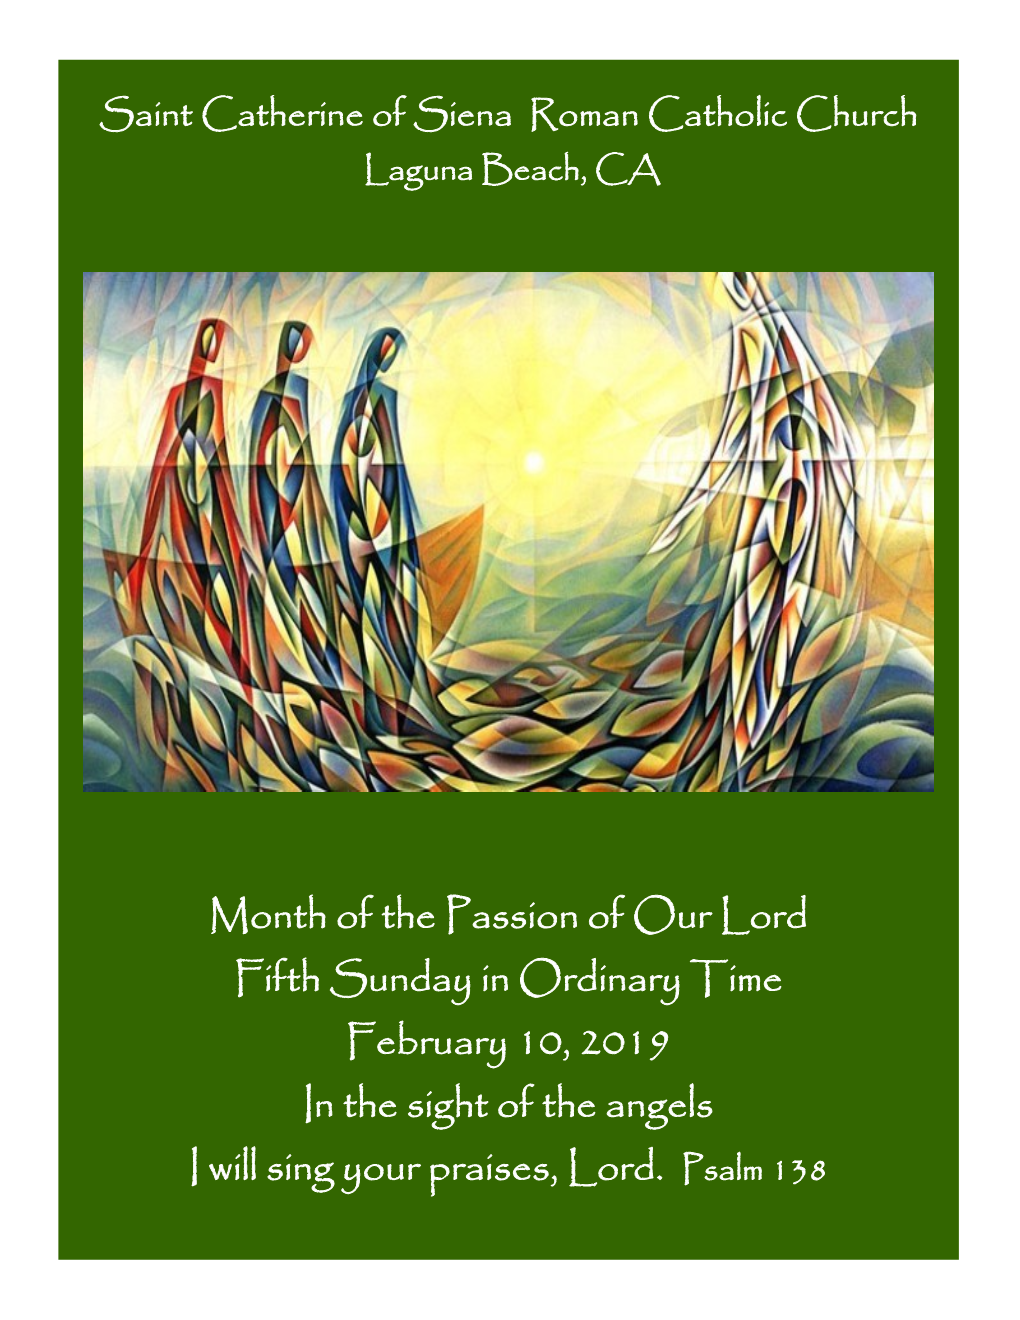 Month of the Passion of Our Lord Fifth Sunday in Ordinary Time February 10, 2019 in the Sight of the Angels I Will Sing Your Praises, Lord